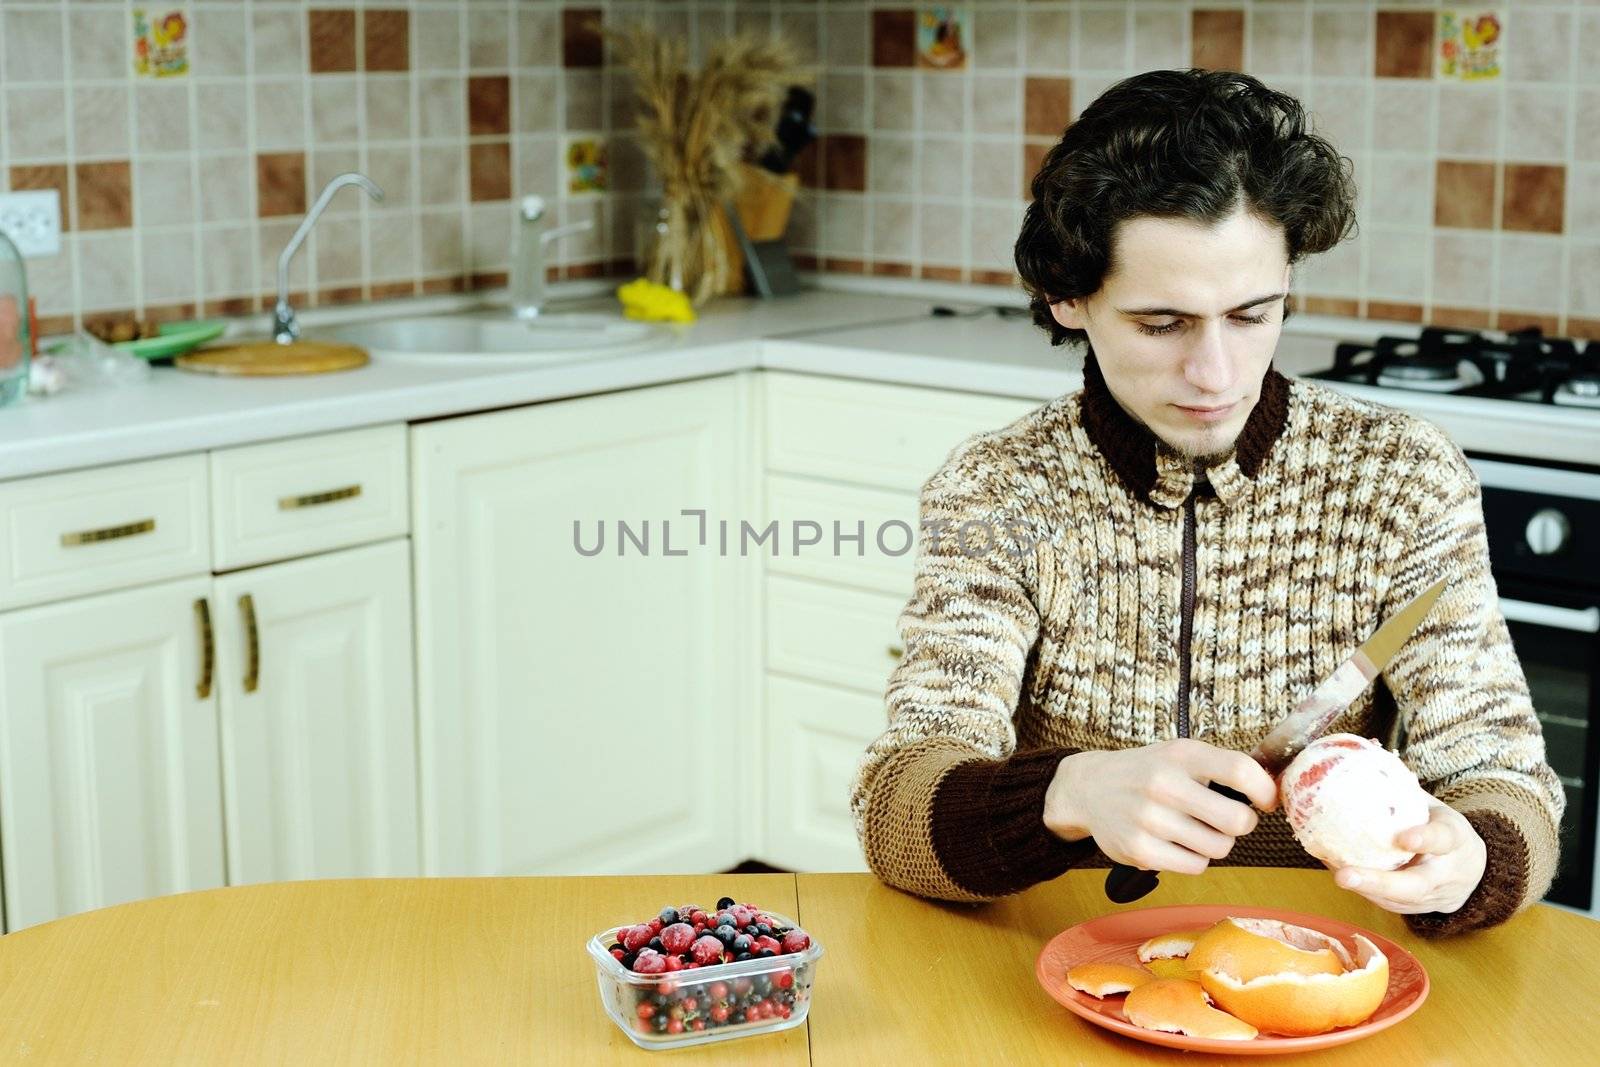 A man peelling the grapefruit in the kitchen